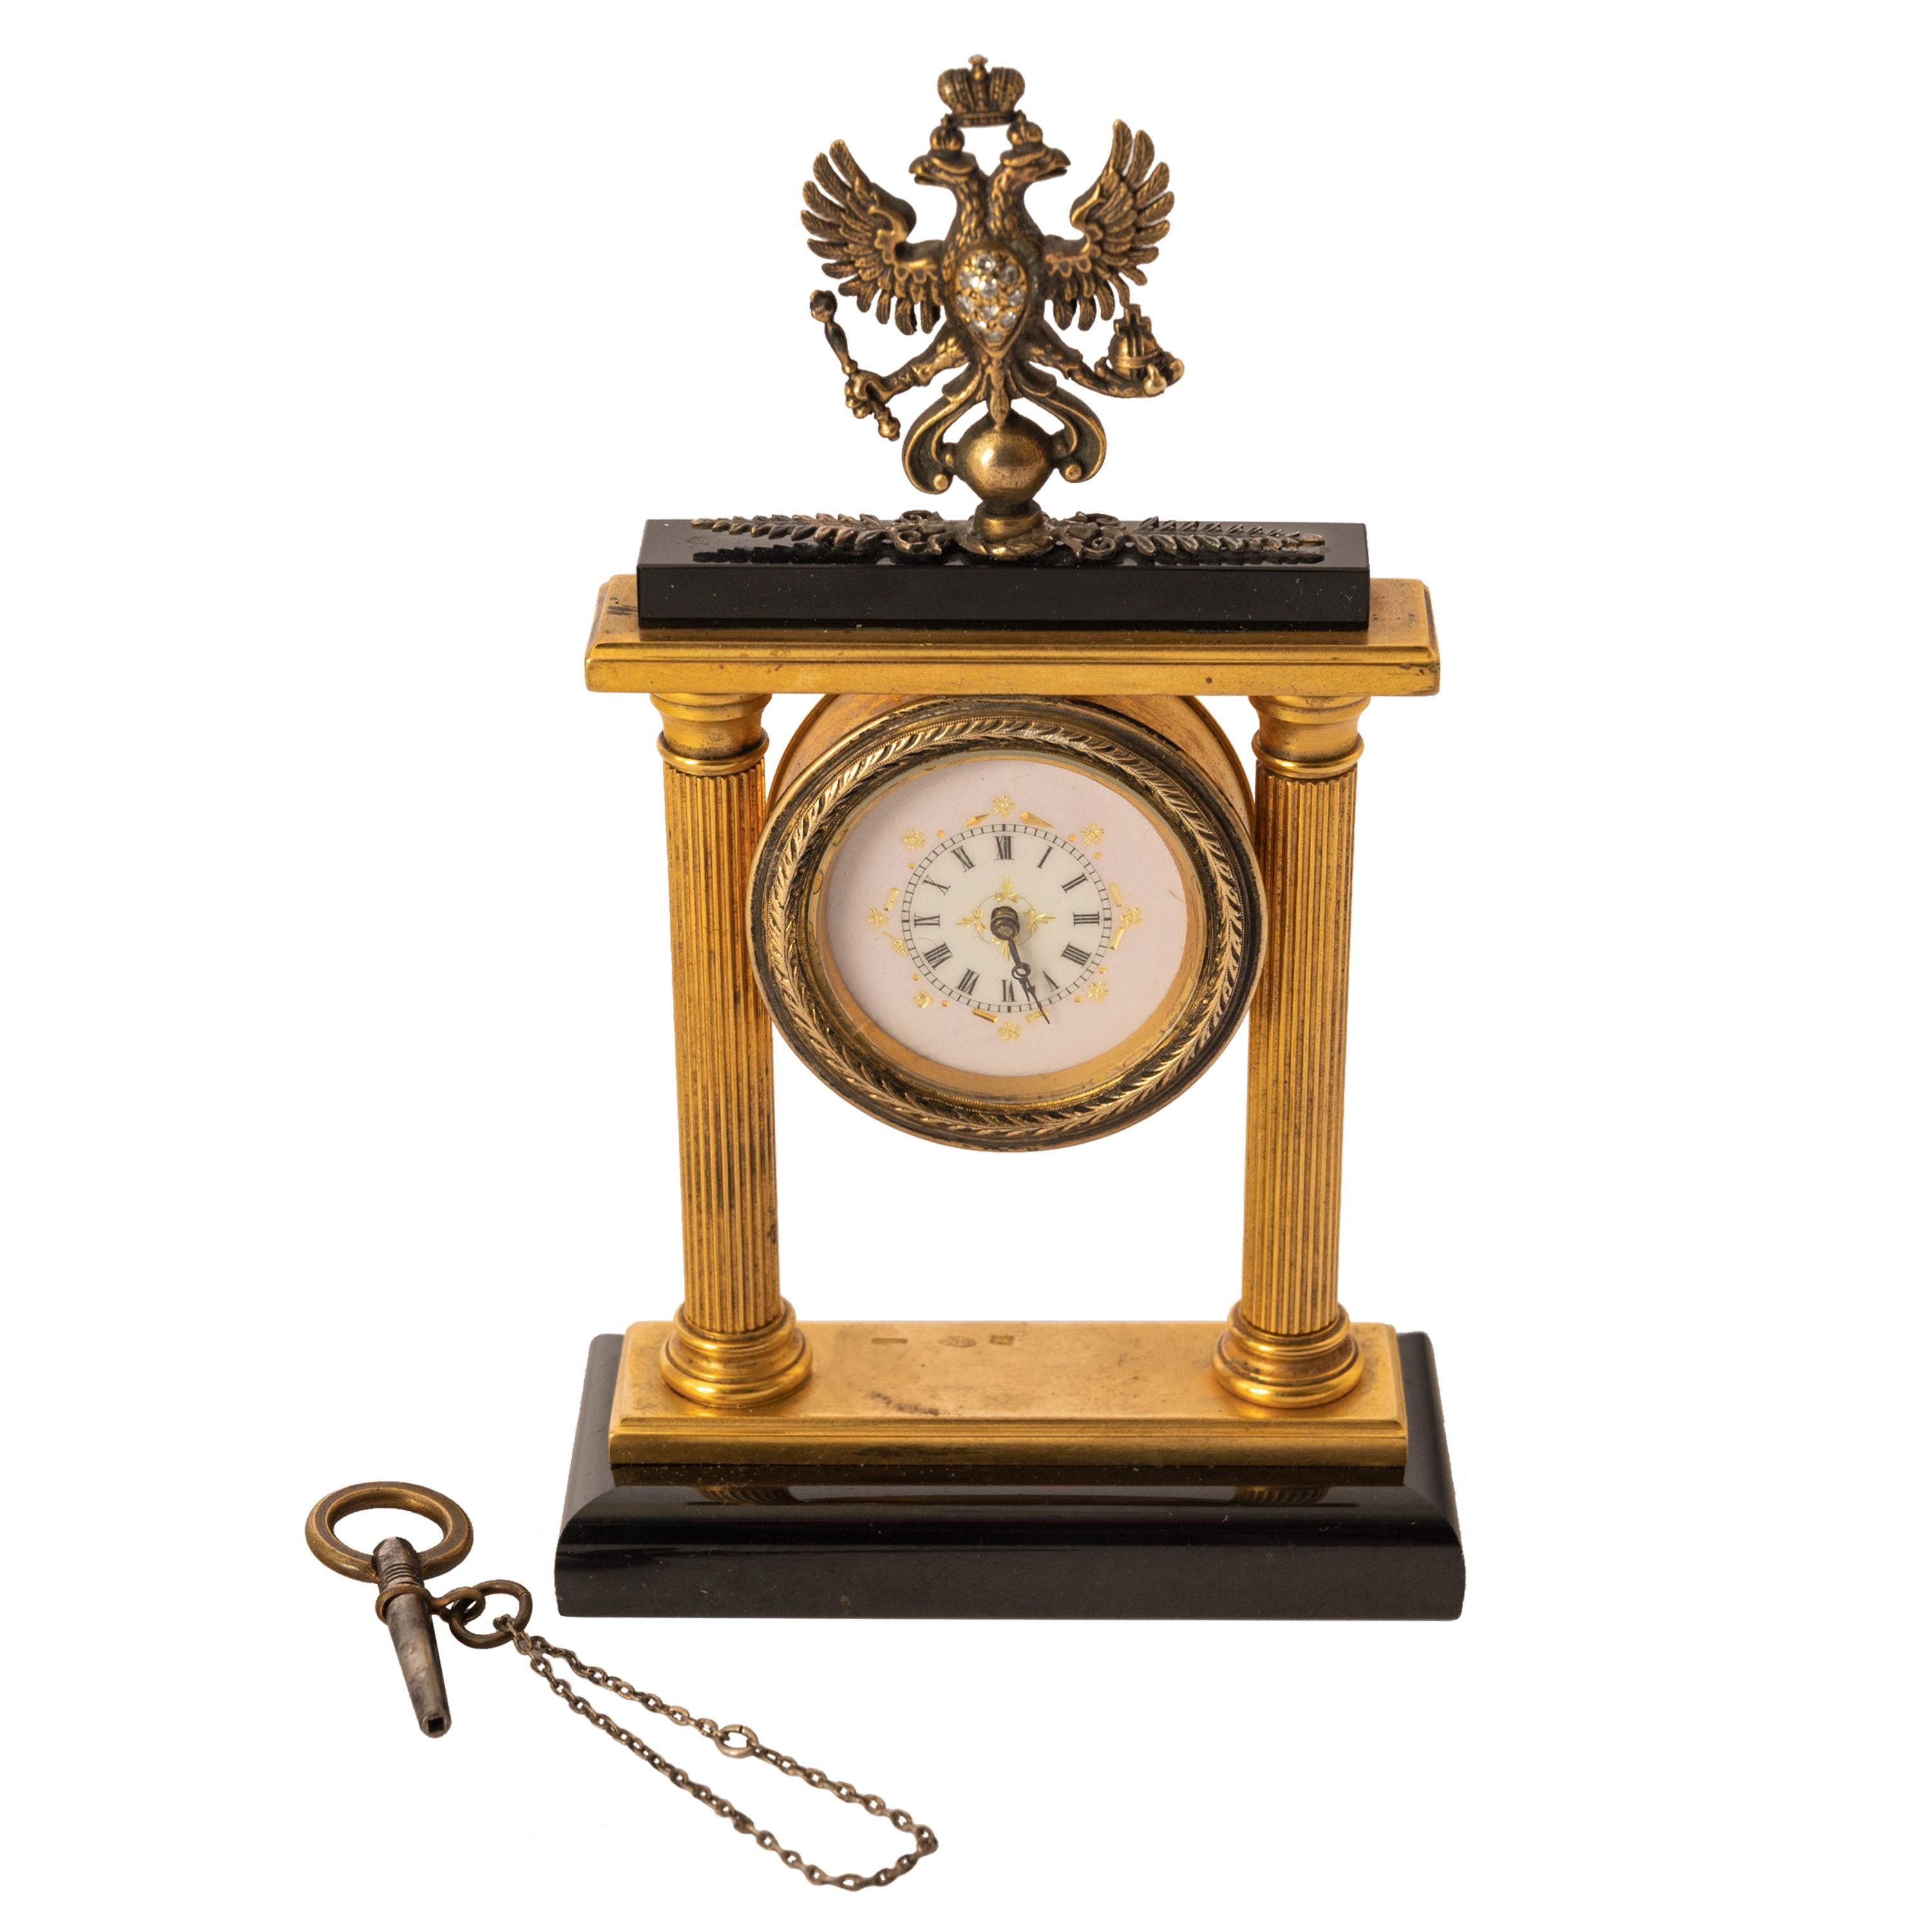 Antique Imperial Russian Peter Carl Faberge Silver Gilt Diamond 8 Day Clock 1900 For Sale 1